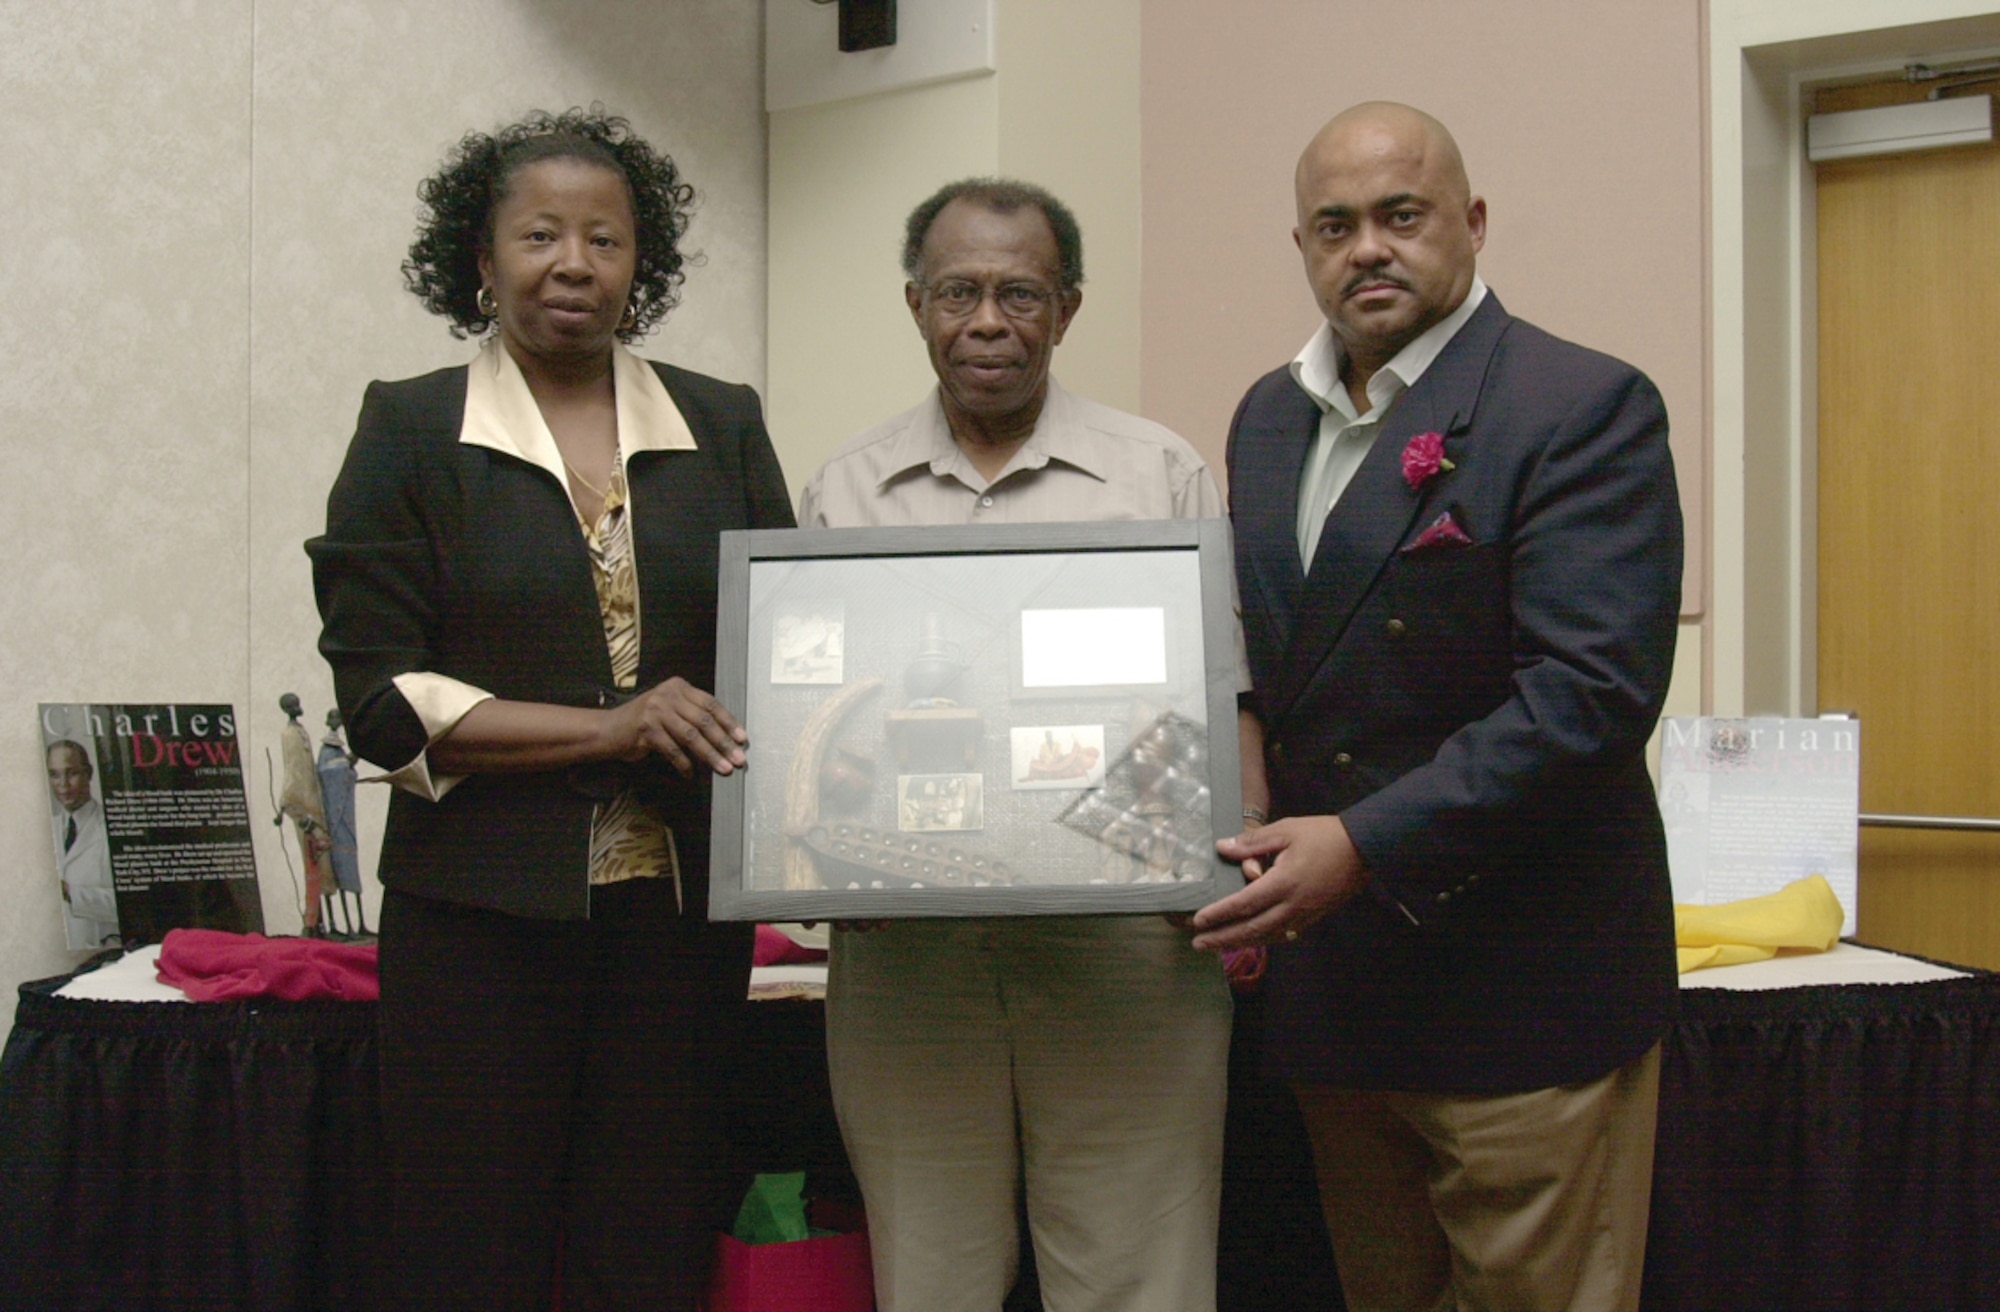 Karen Mitchell (left) and Master Sgt. David Bryan present Wendell Johnson (Center) with a gift as token of appreciation for Mr. Johnson’s more than 40 years of service to Goodfellow and his extensive participation in the base’s African-American Heritage Committee. (U.S. Air Force photo by Airman 1st Class Luis Loza Gutierrez)